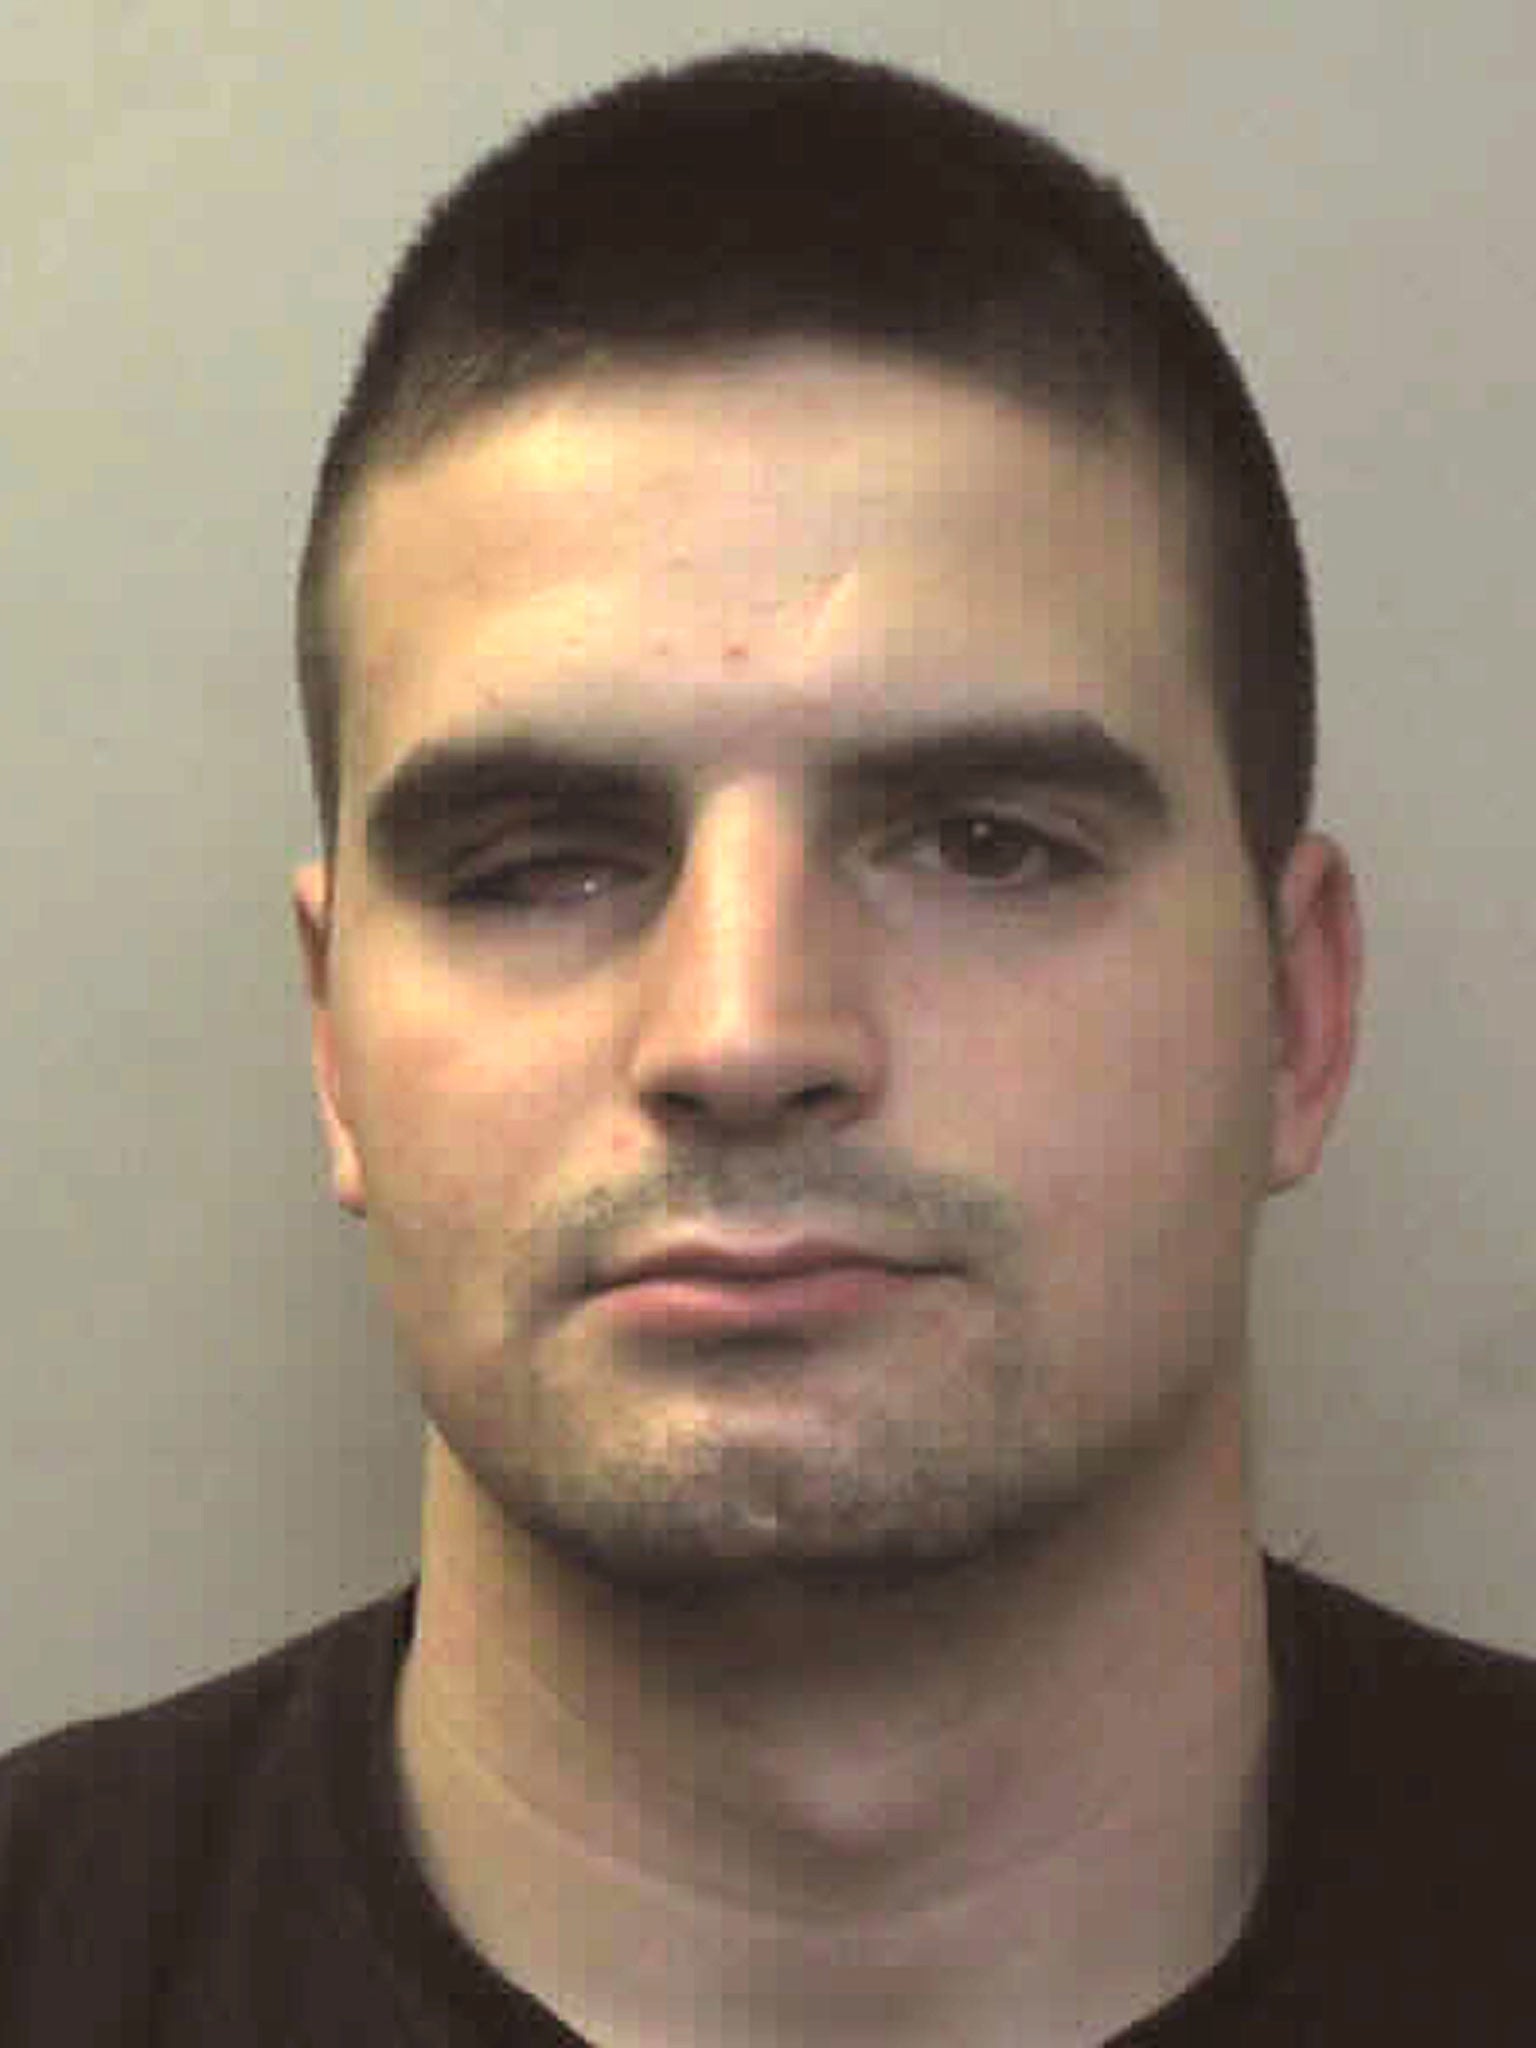 Liam Culverhouse has been jailed for six years for causing the death of his 20 month old daughter